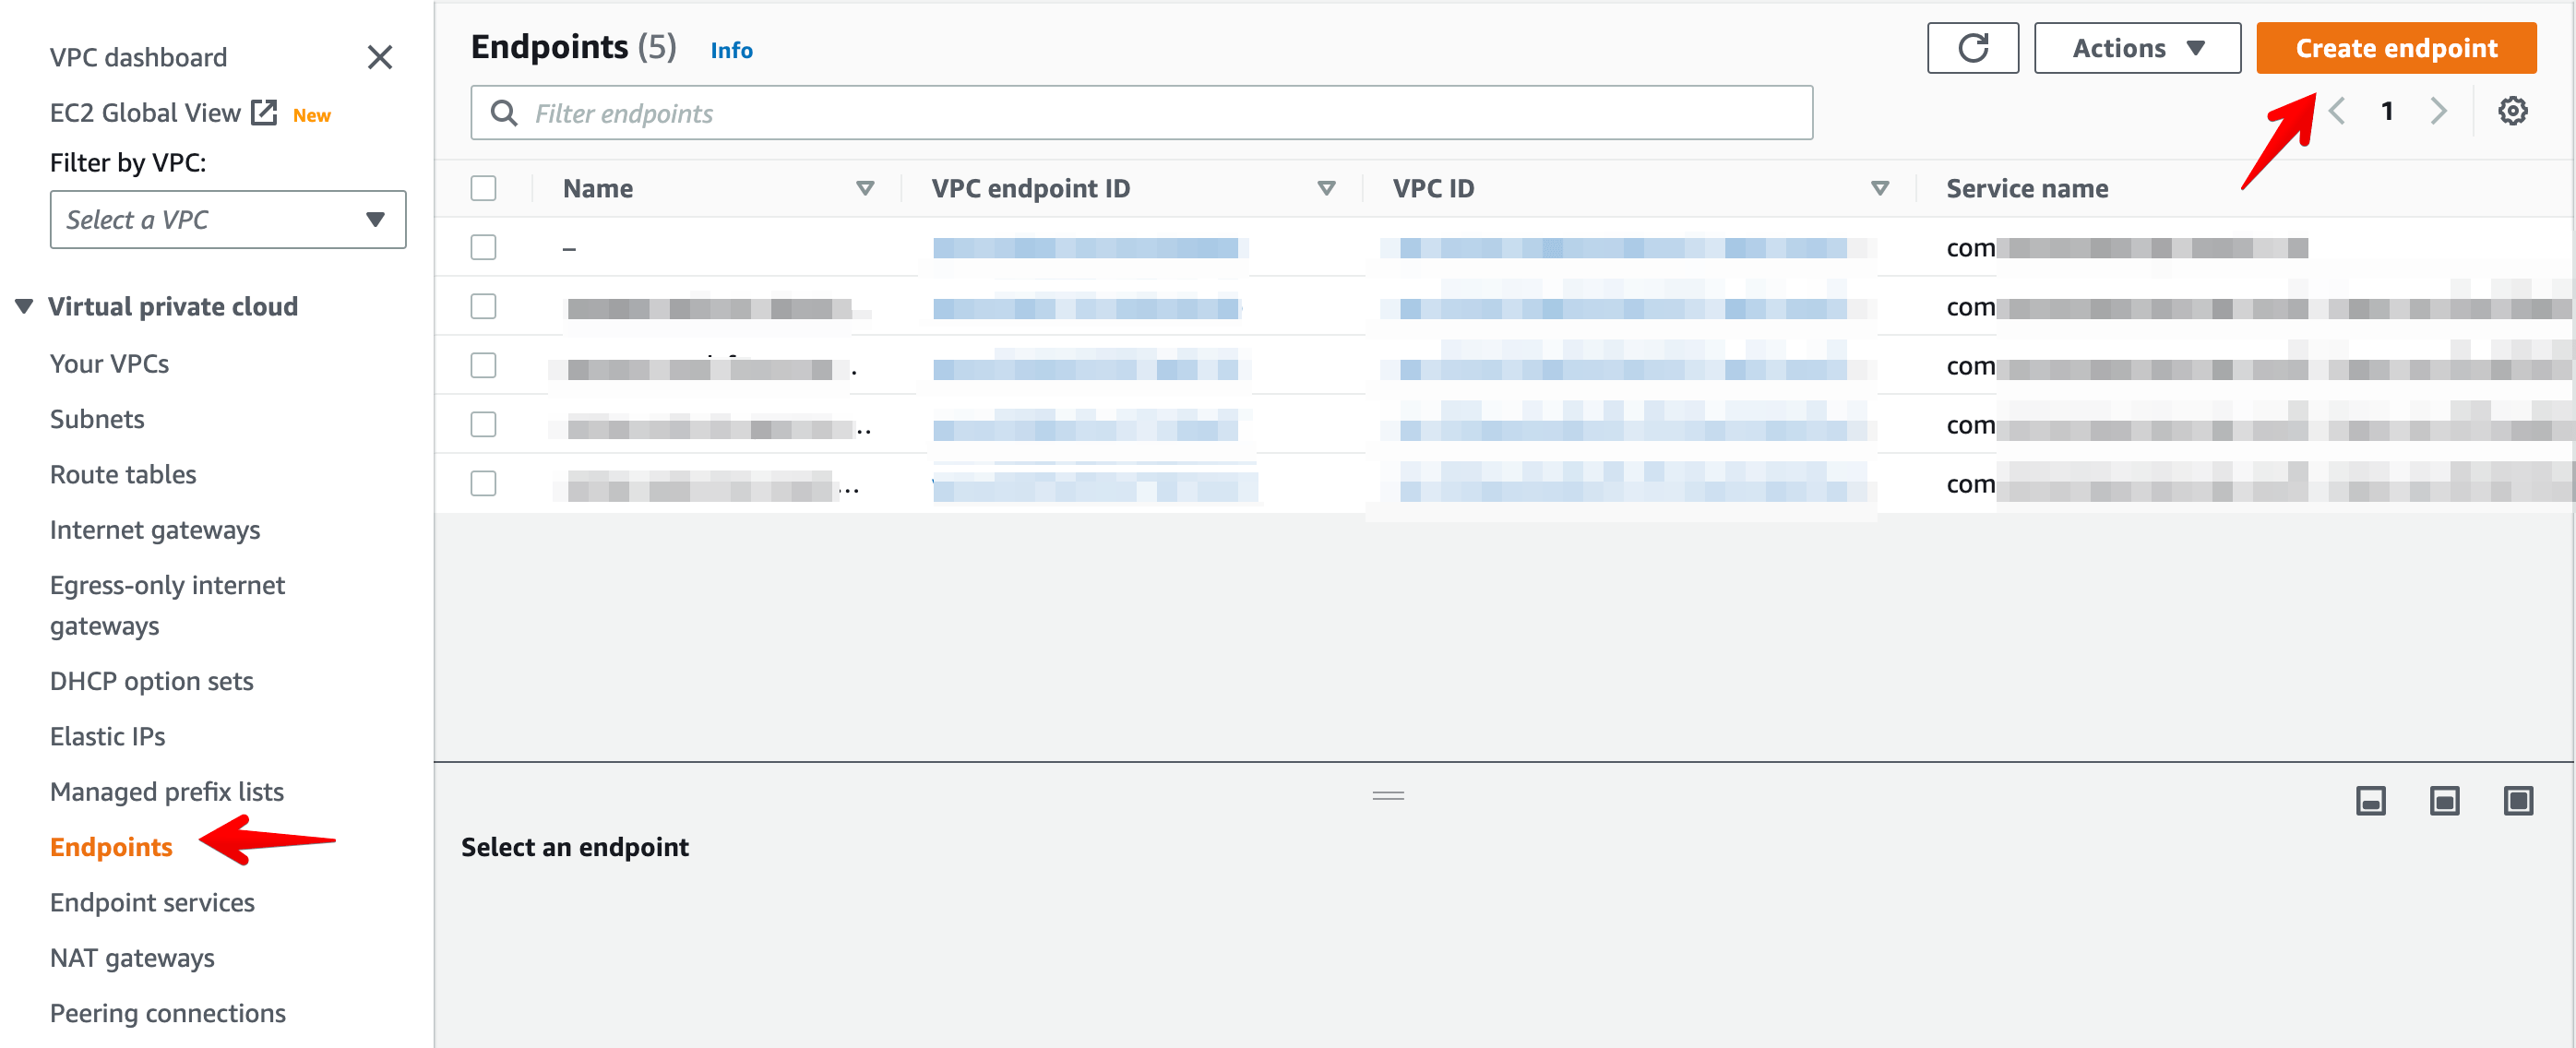 Create an endpoint in your VPC